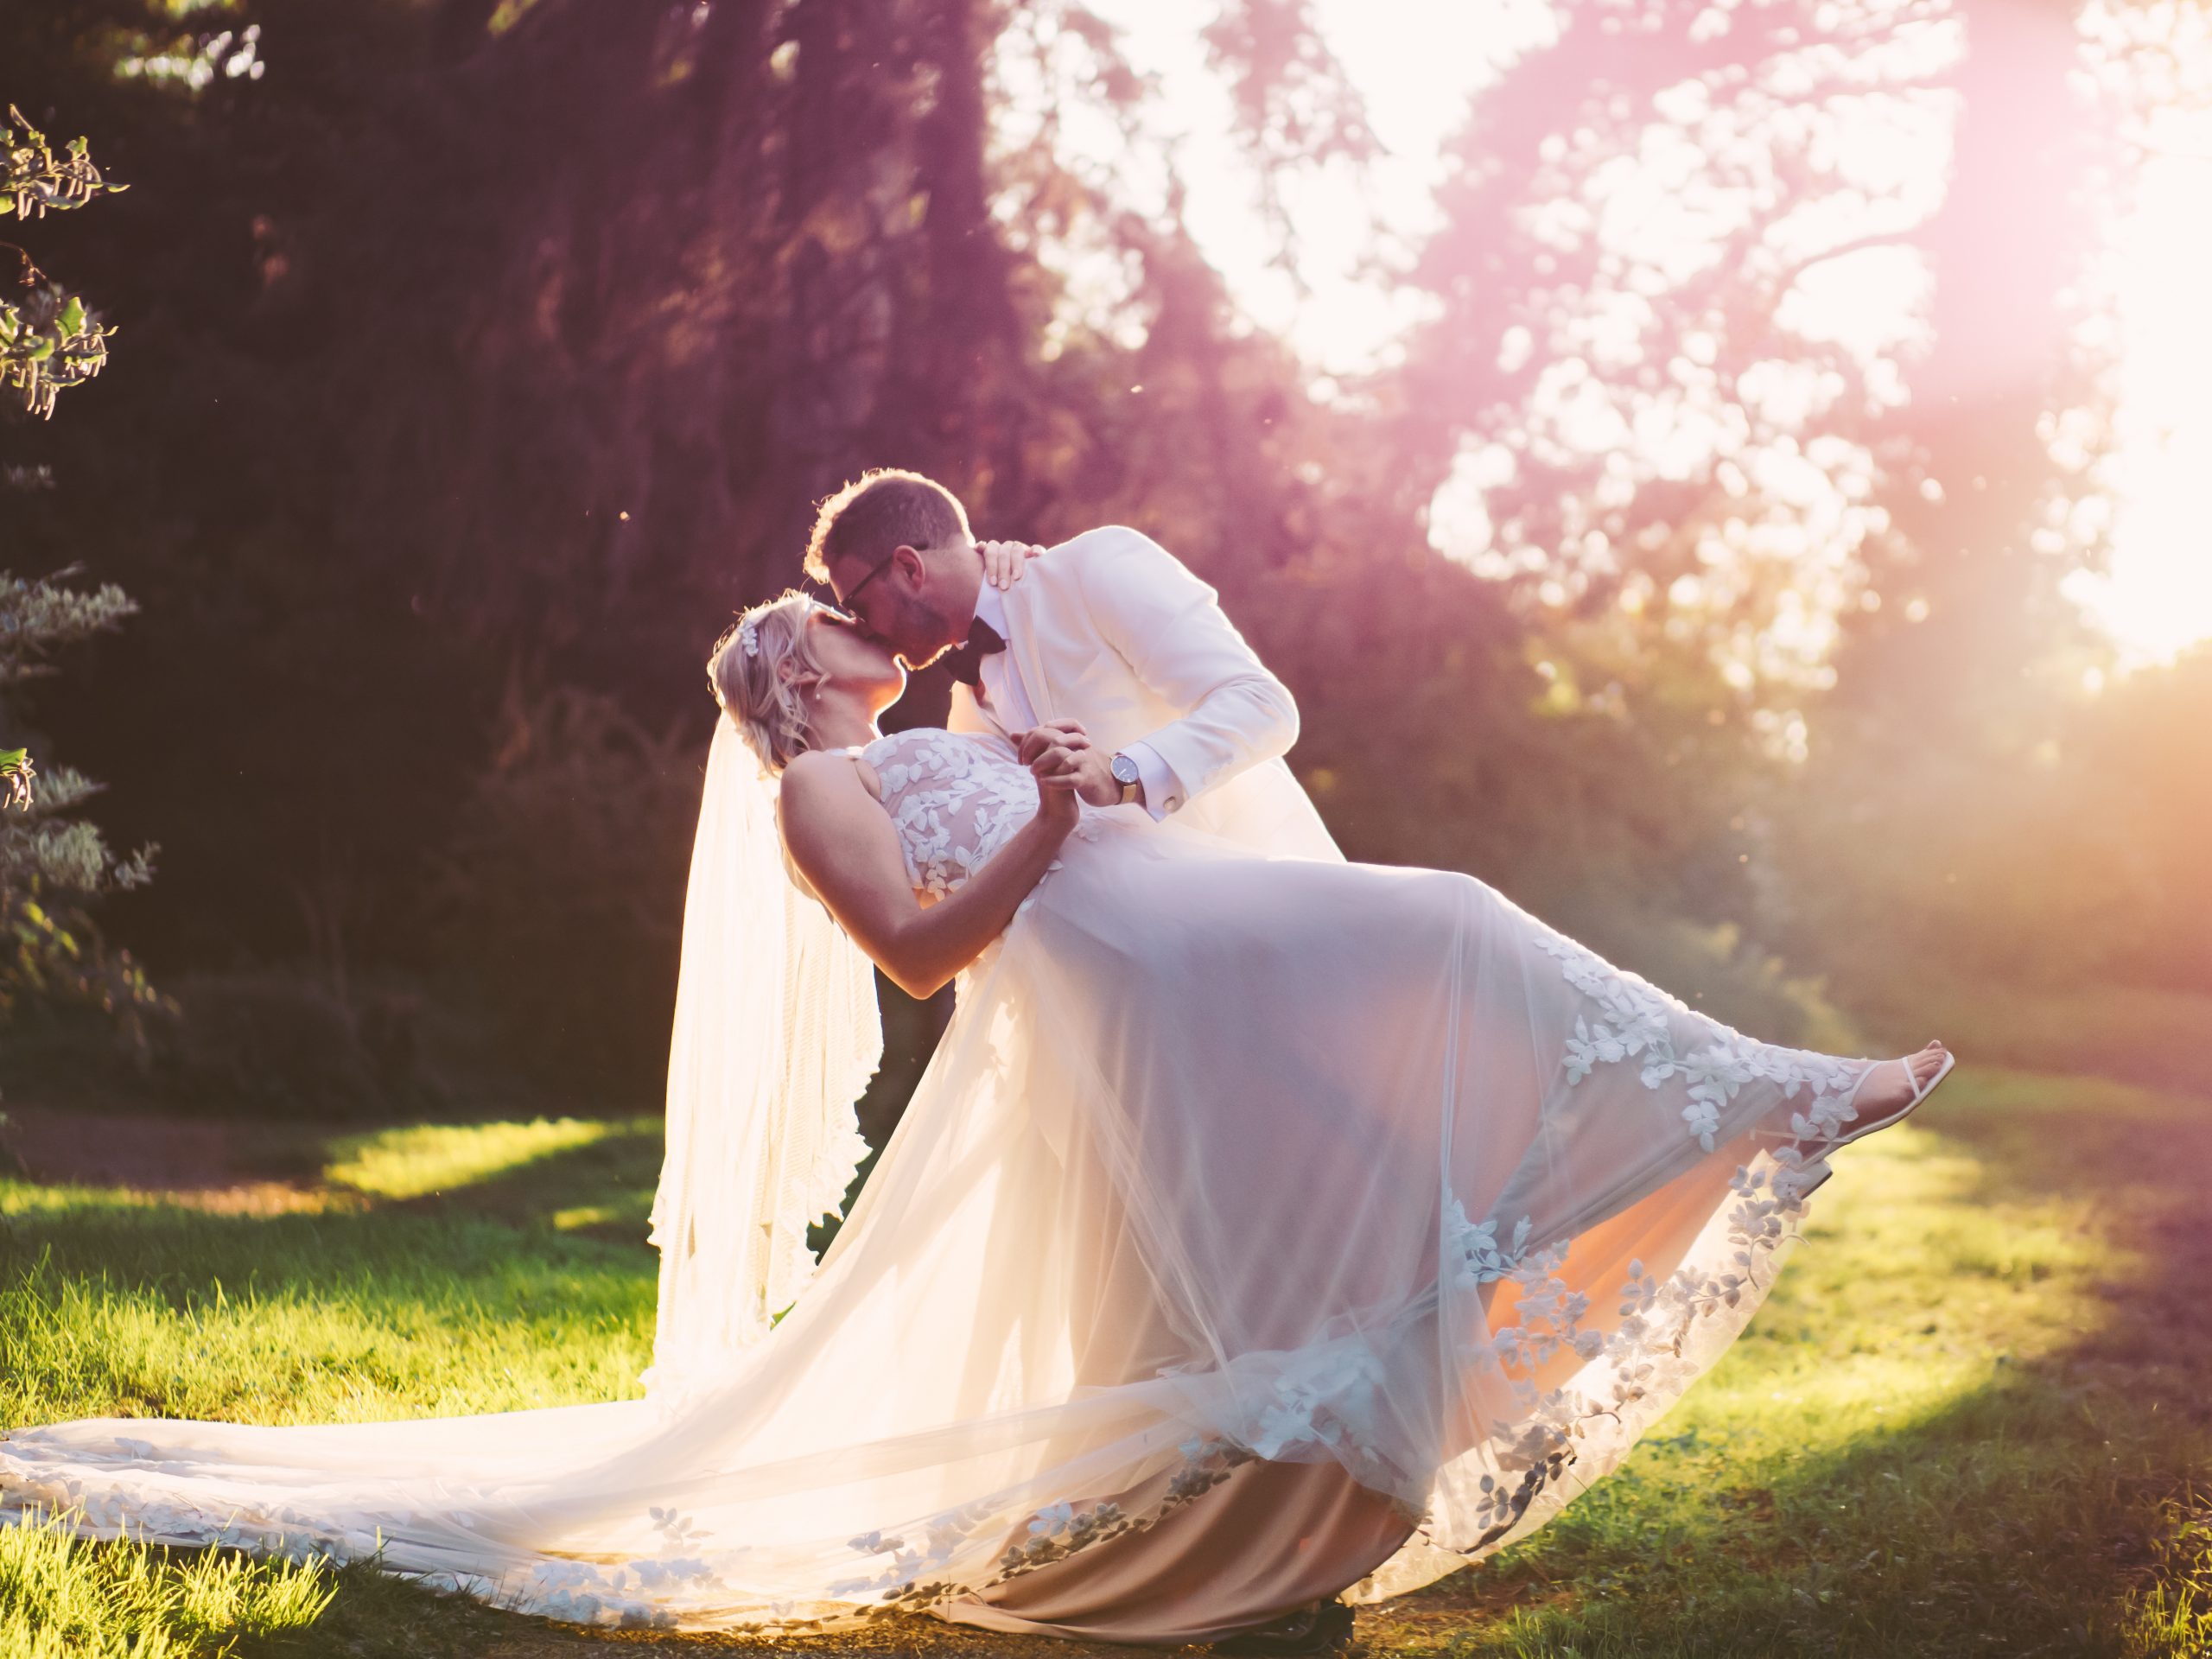 Perfect golden hour wedding photography in England & Wales